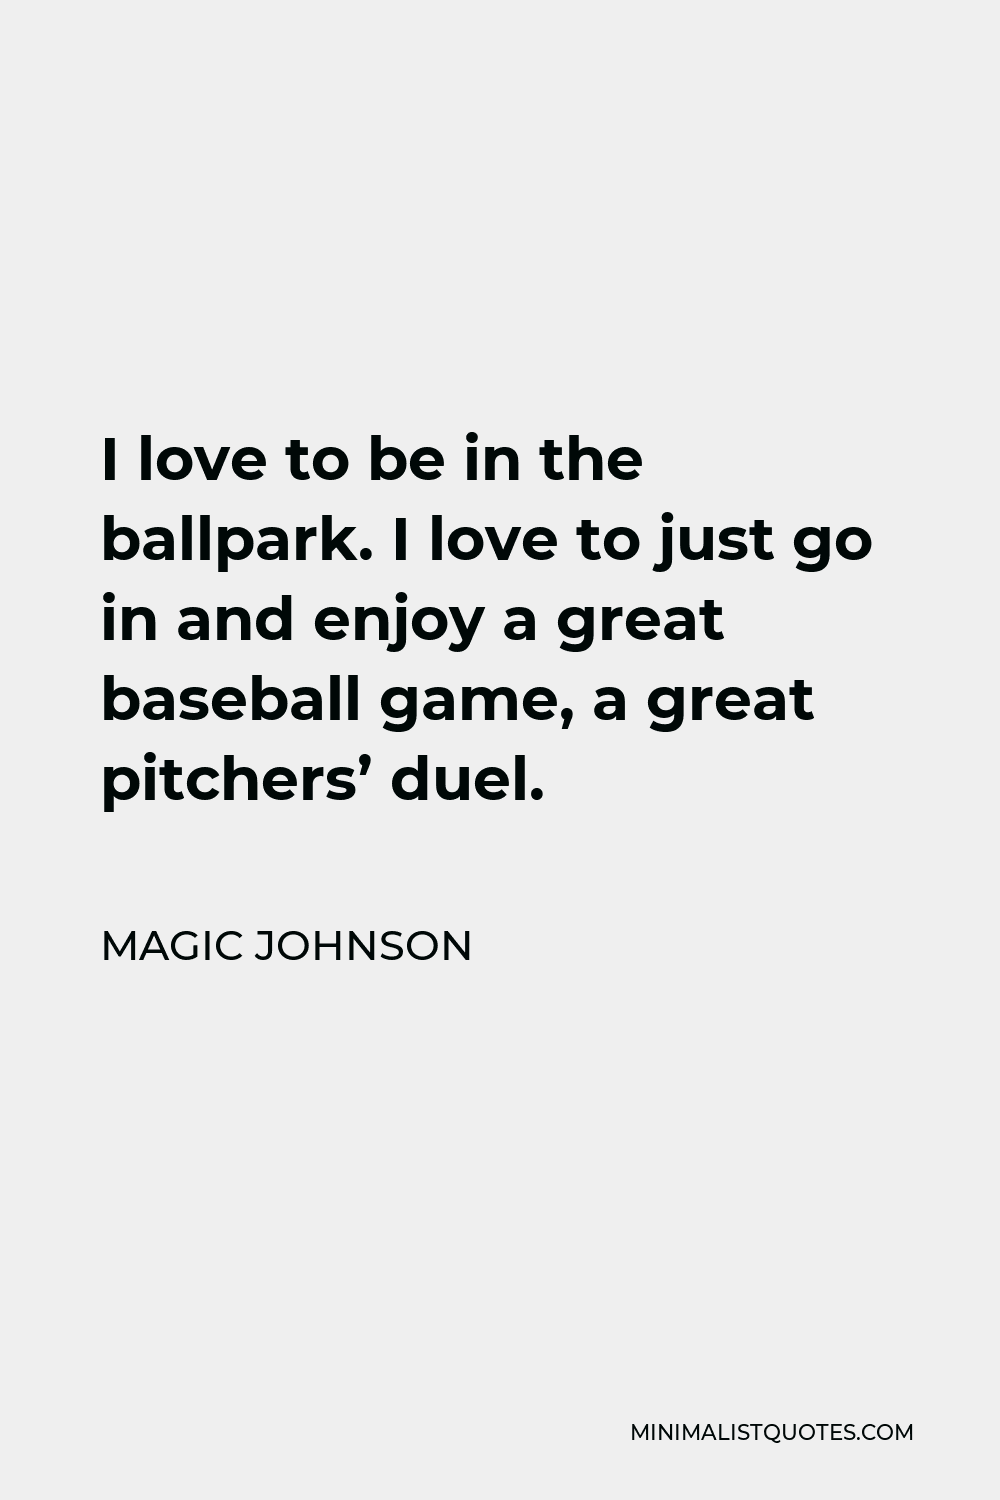 Magic Johnson Quote - I love to be in the ballpark. I love to just go in and enjoy a great baseball game, a great pitchers’ duel.